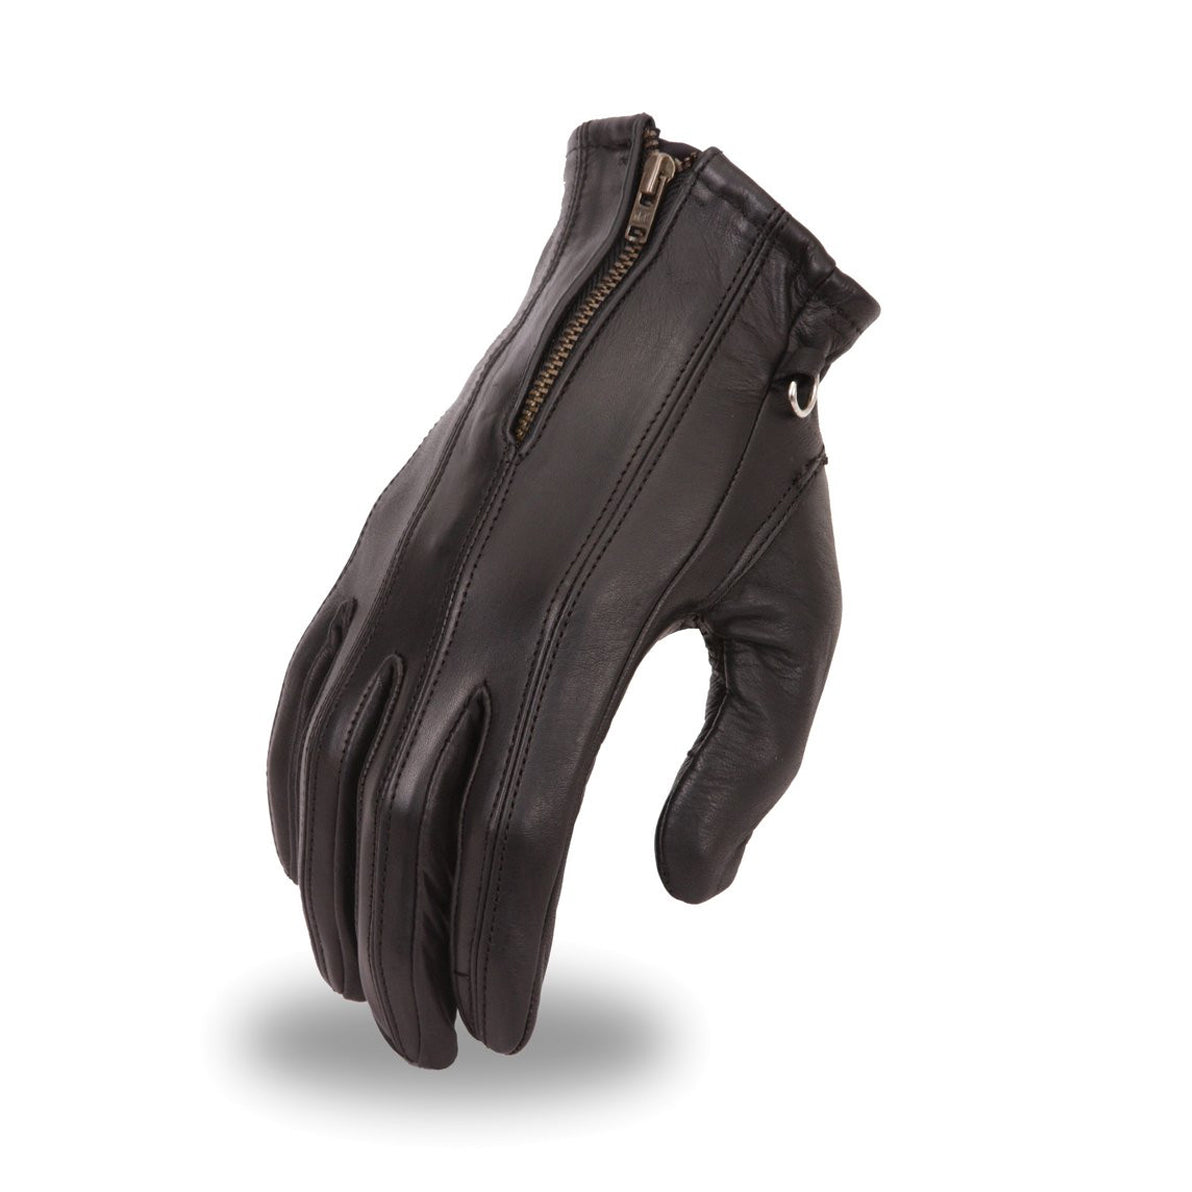 Motorcycle Ladies Blk Soft leather gloves with Zipper gel palm